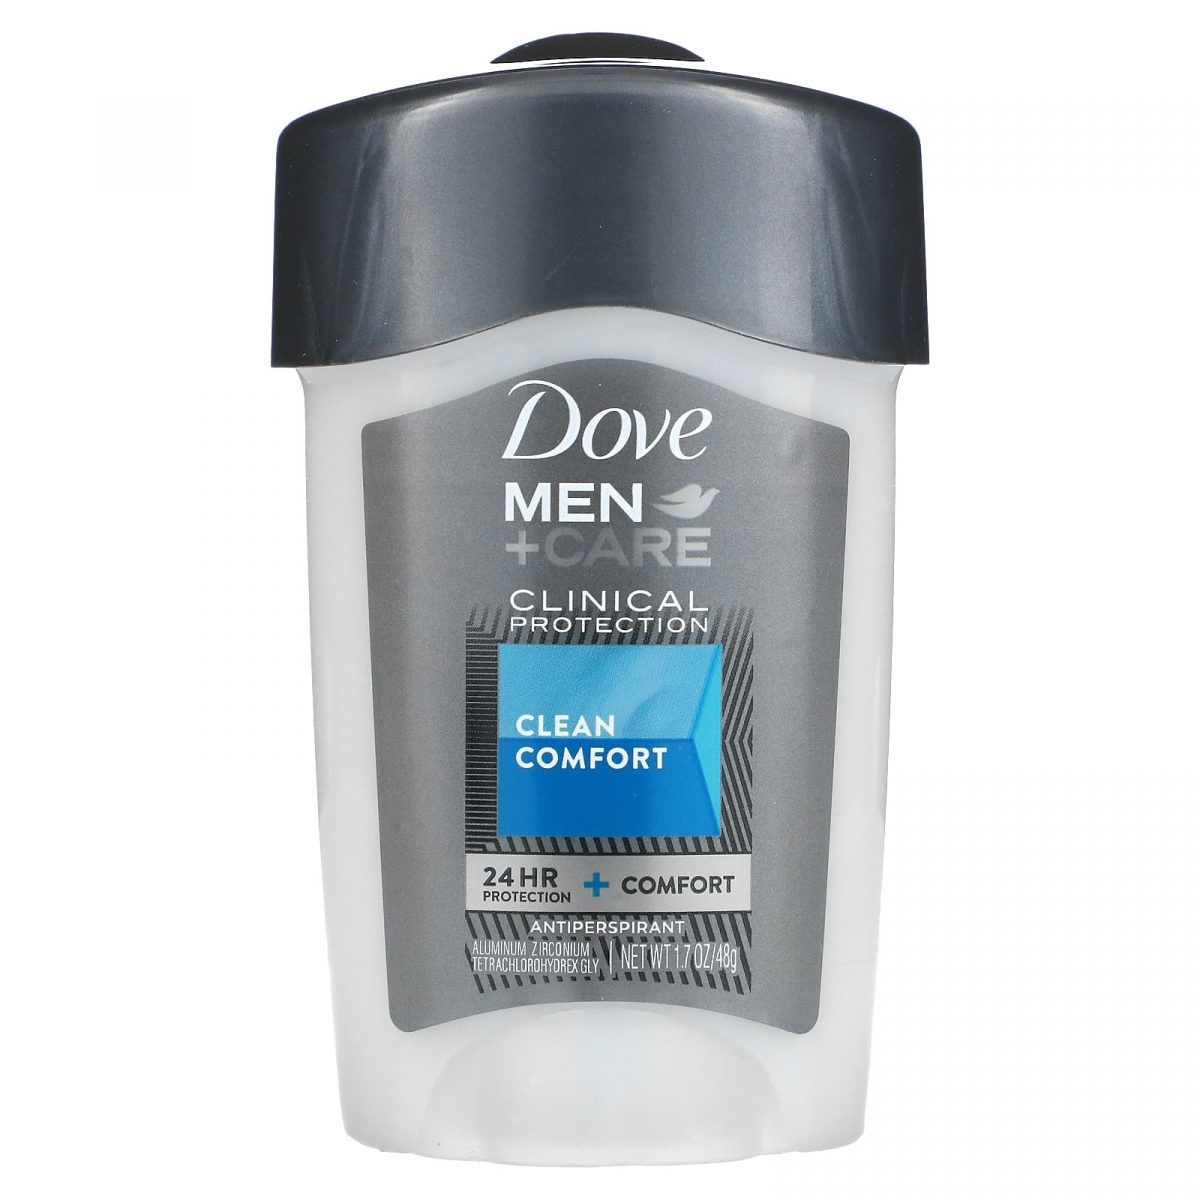 Dove Men Care Clinical Protection Clean Comfort